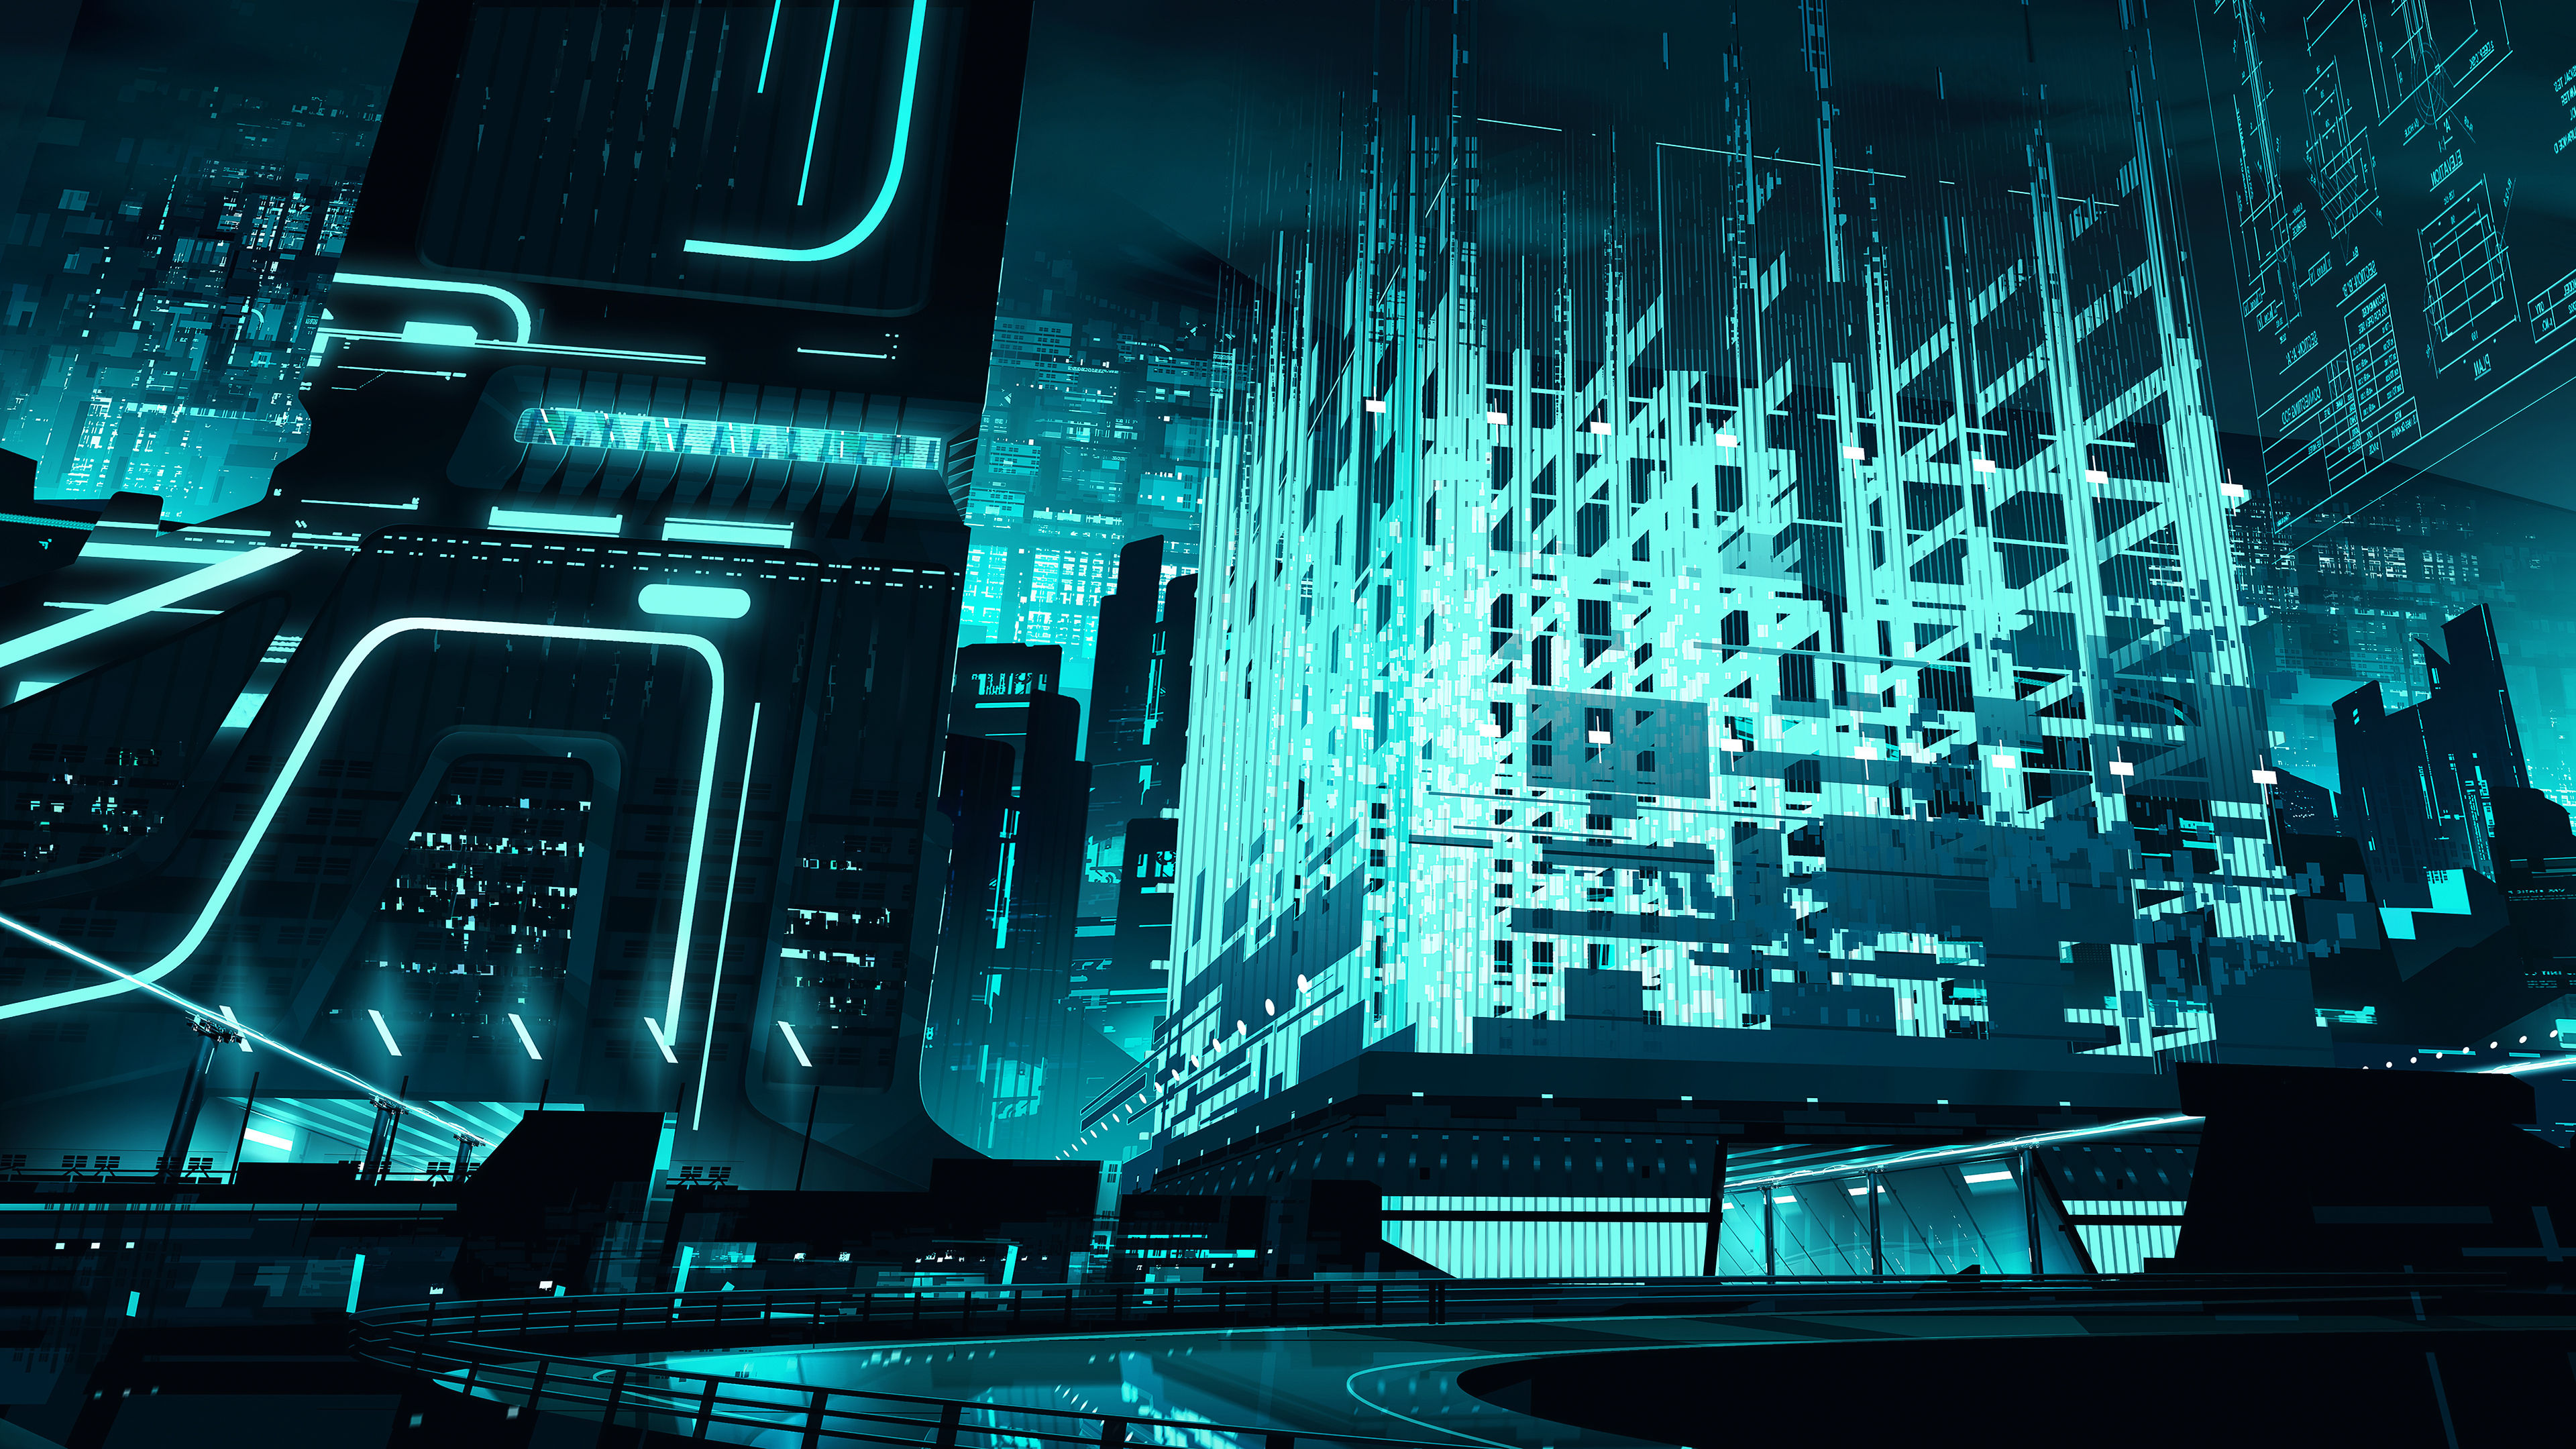 Artwork Science Fiction Tron Tron Uprising Skyscraper Cityscape Glowing Robh Ruppel 3840x2160